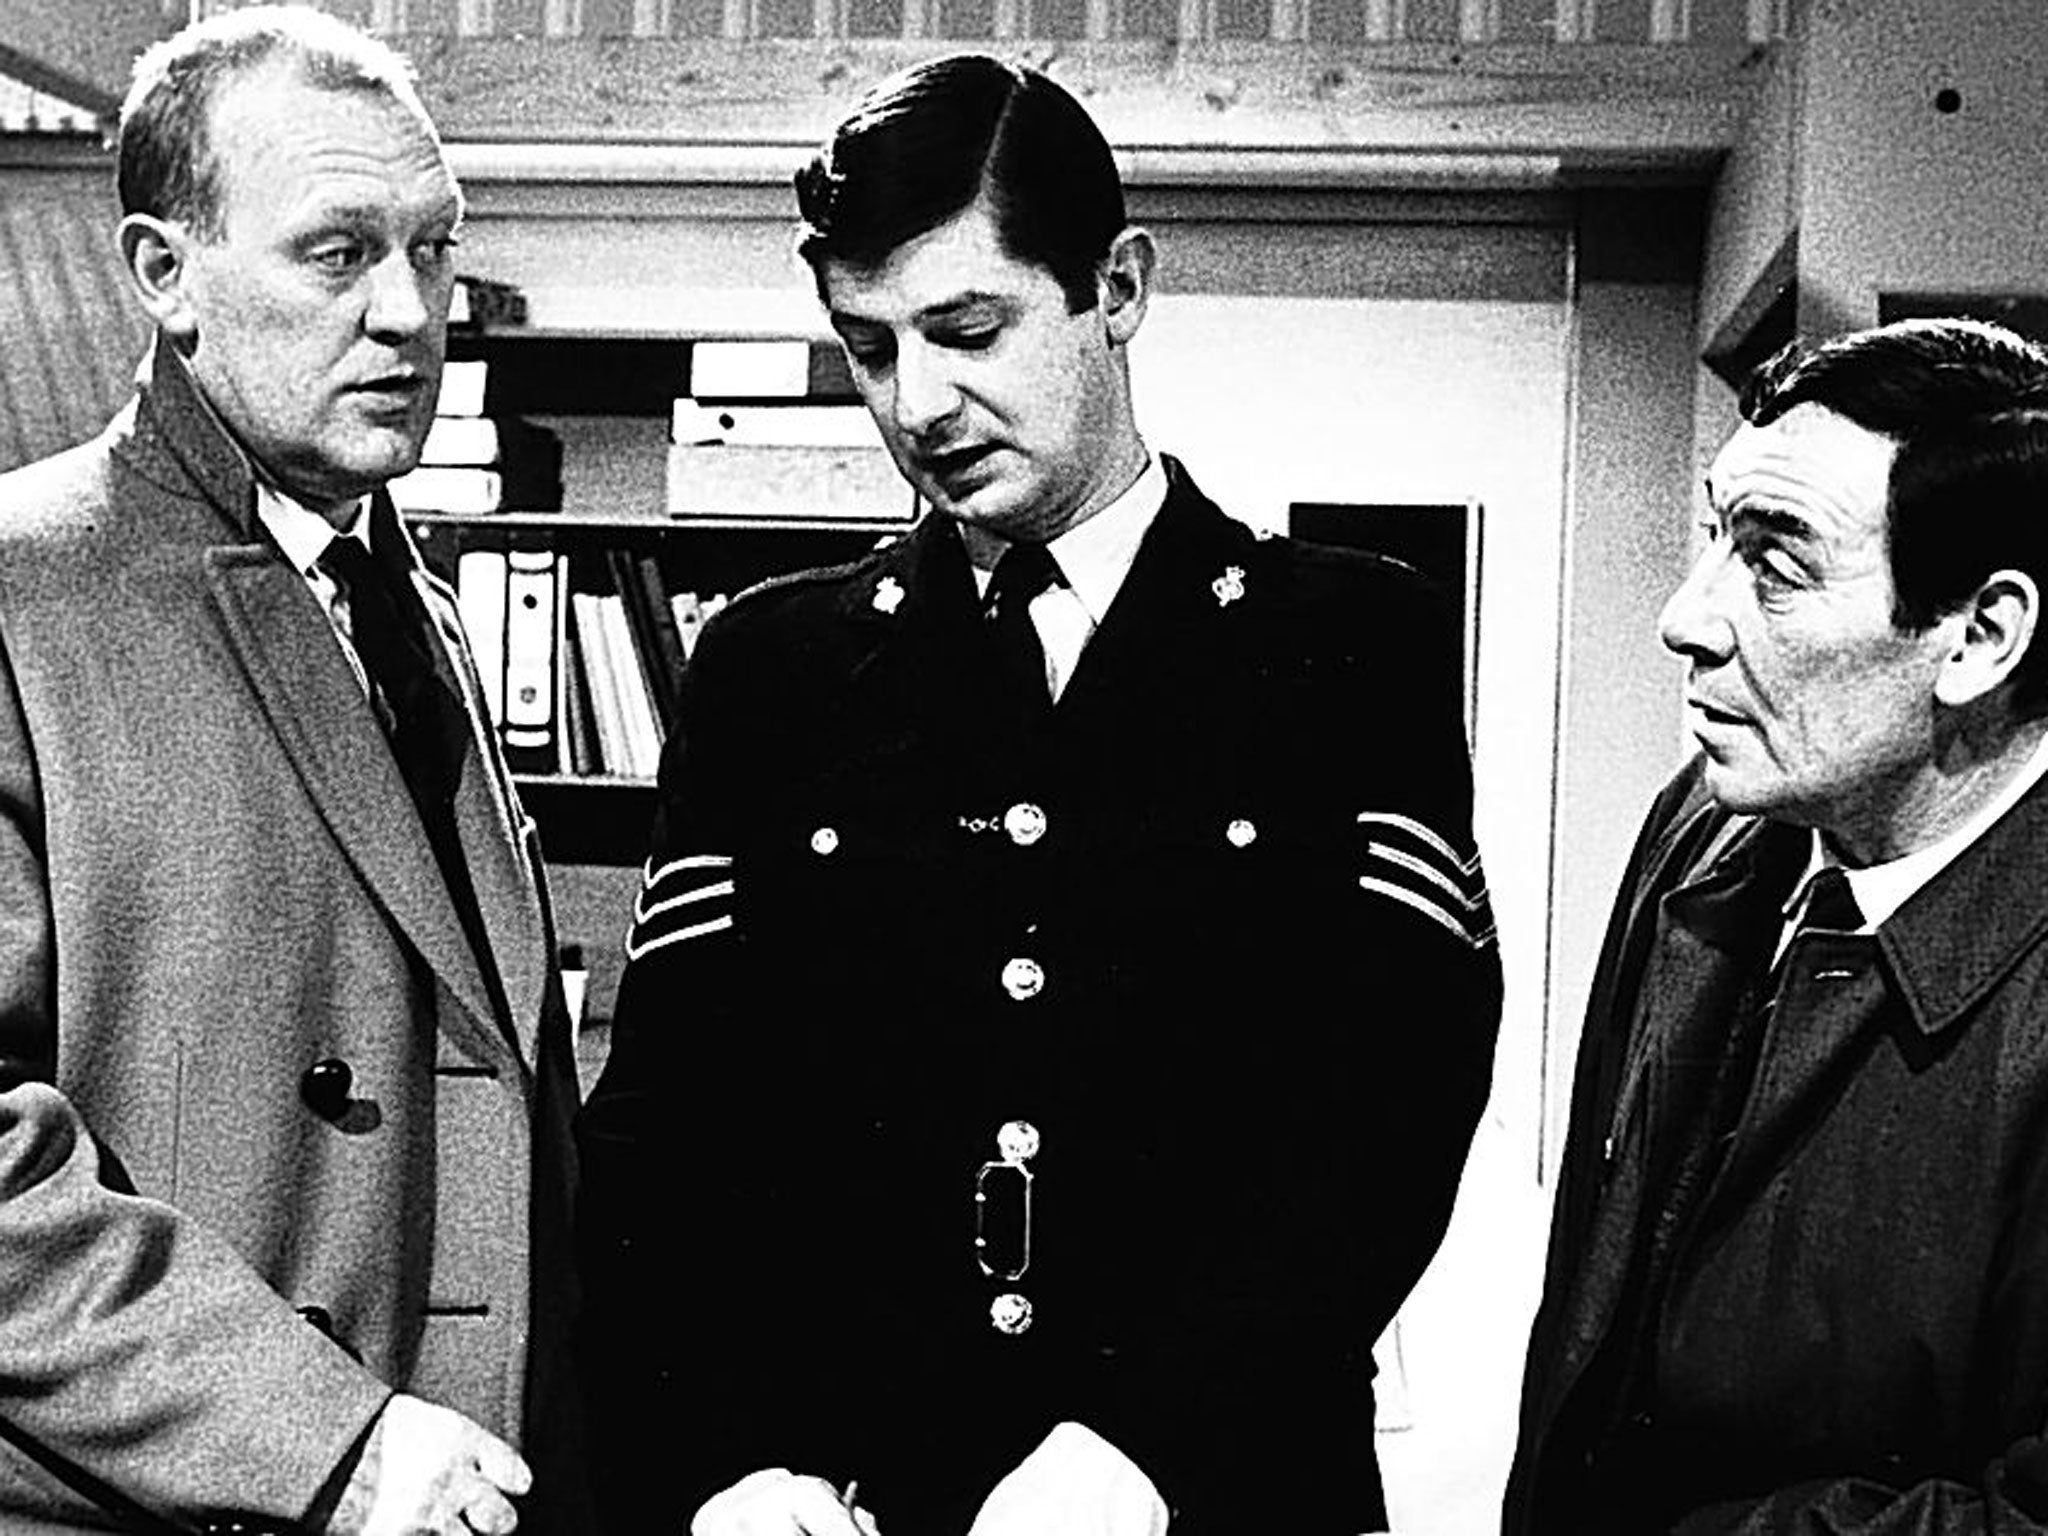 Ellis, centre, in a 1968 episode of 'Z-Cars' with Joss Ackland,
left, and John Slater